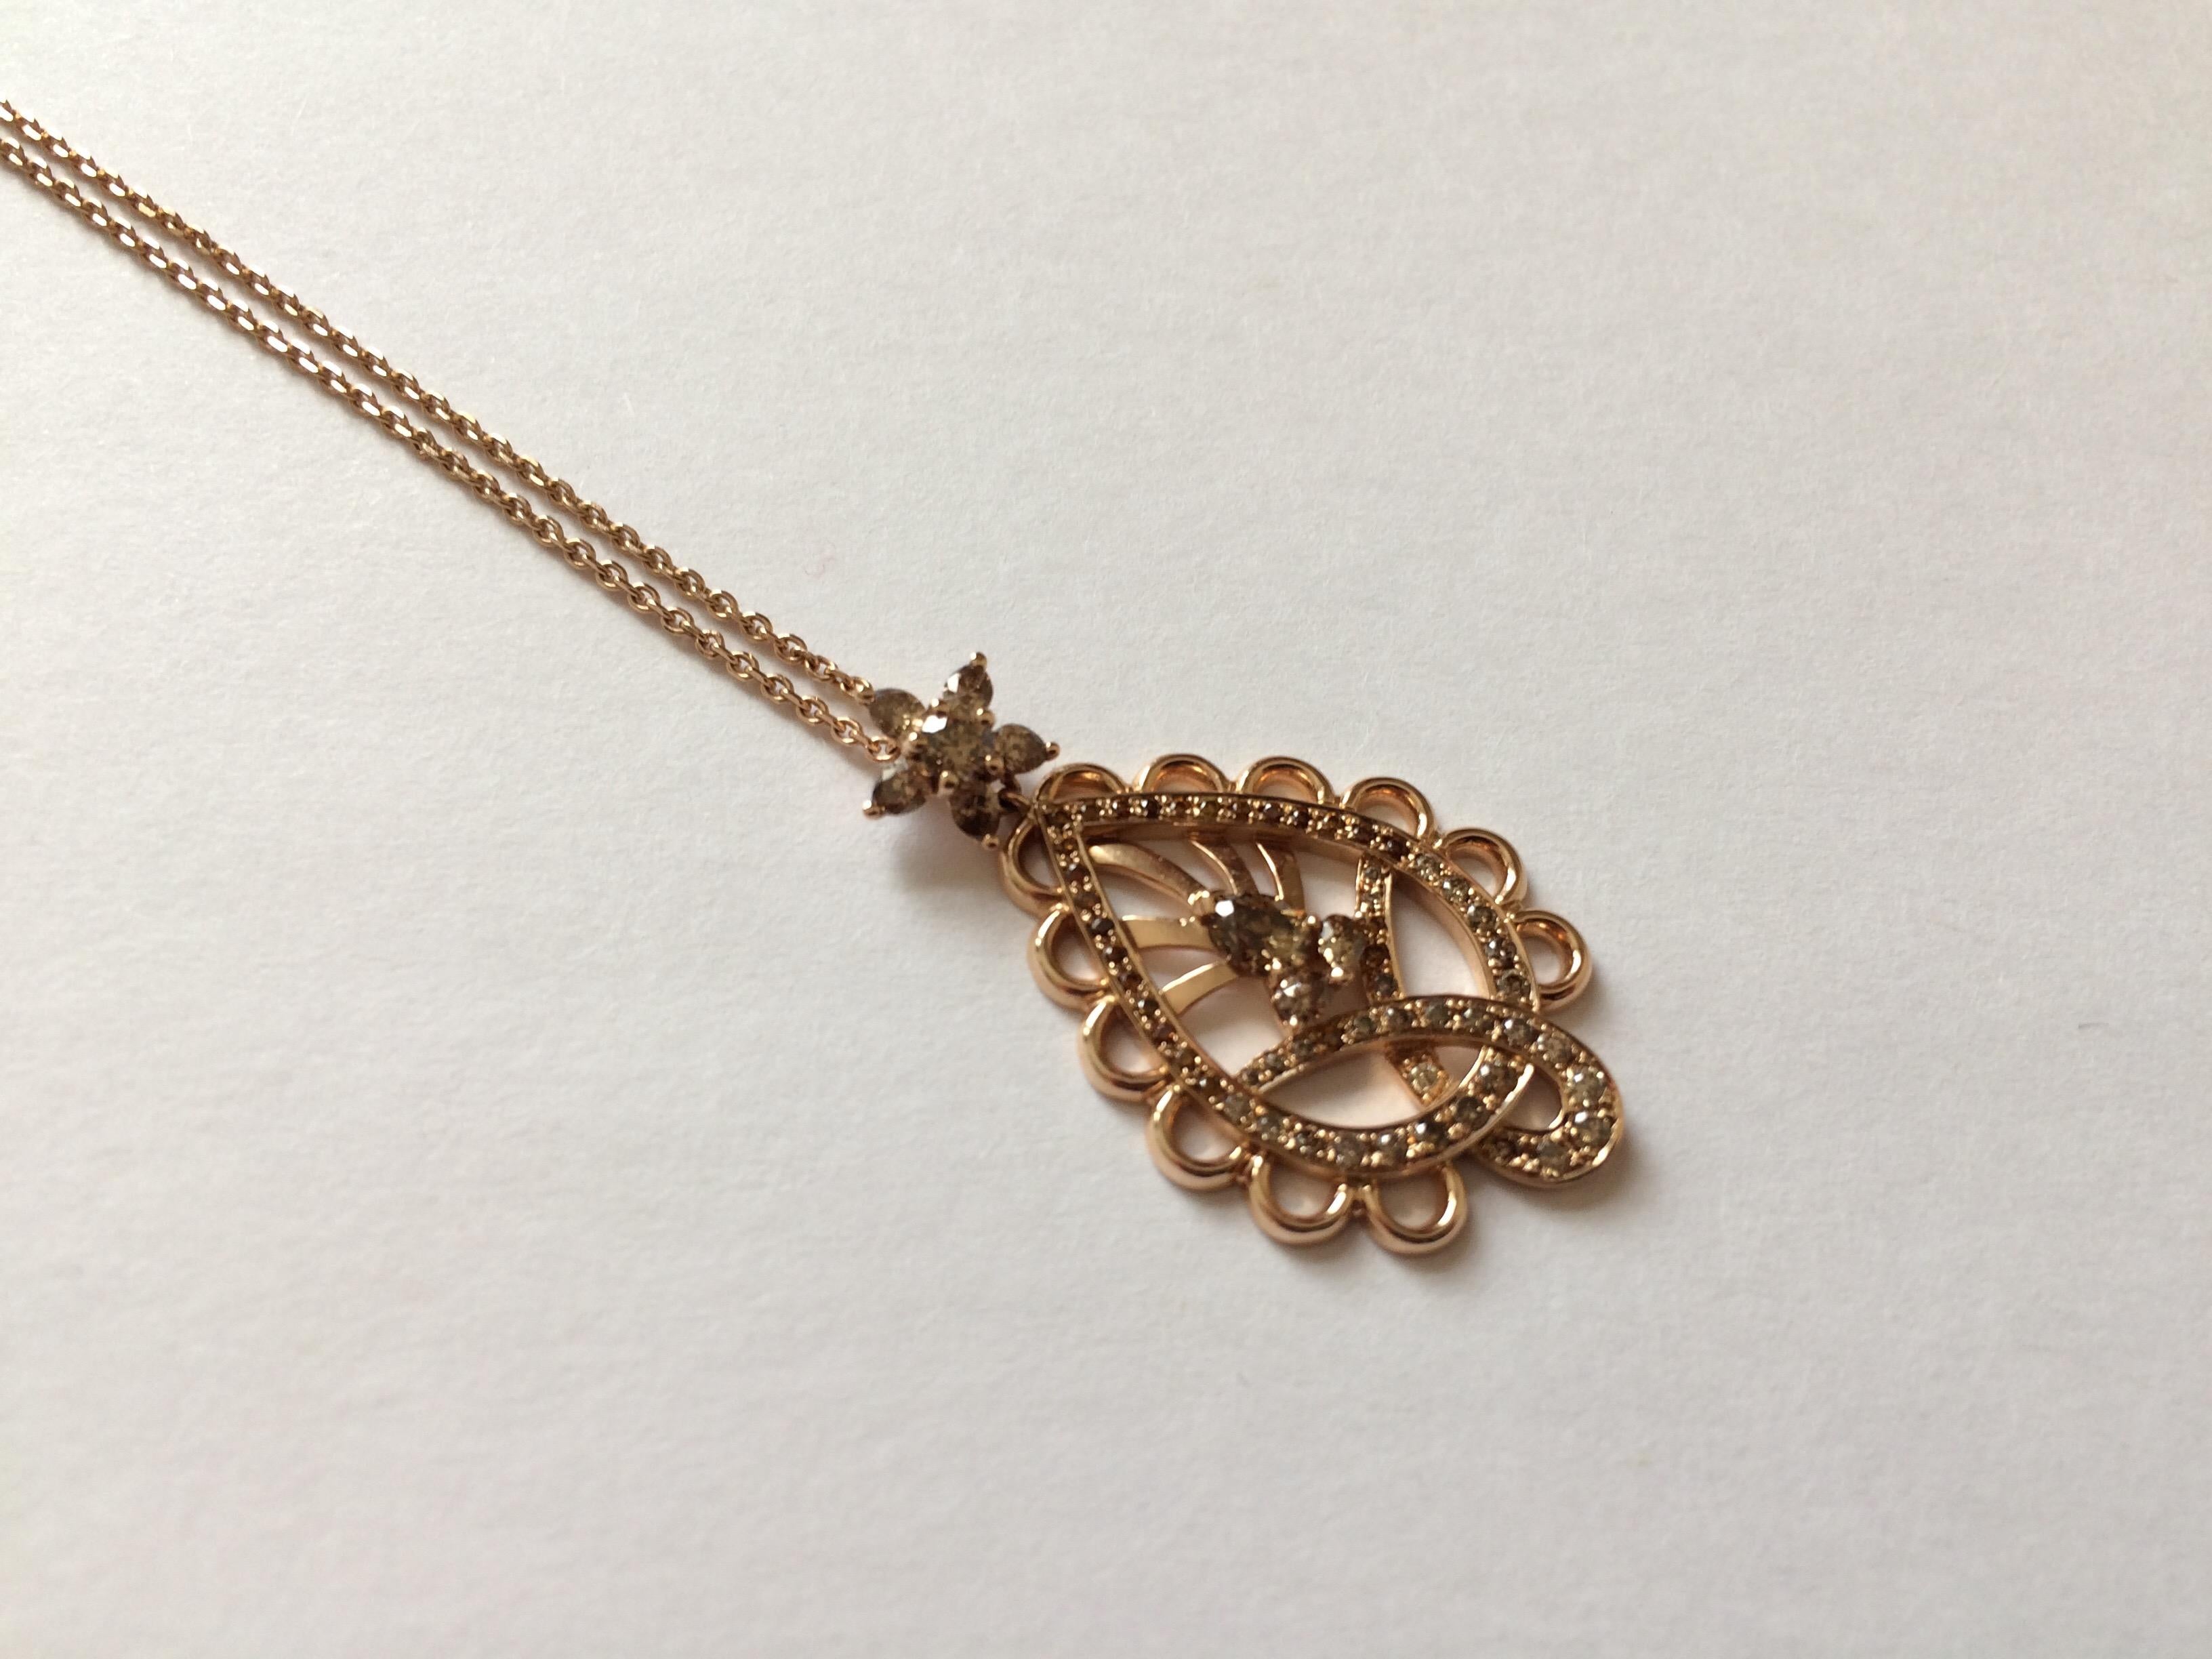 This pendant is handcrafted from 18ct rose gold and set with natural cognac diamonds which total 1.25ct. These stones were hand cut, specifically for this piece. 

Diameter of pendant: 2cm
Length of pendant: 3.5cm

The chain is 41cm long or 16